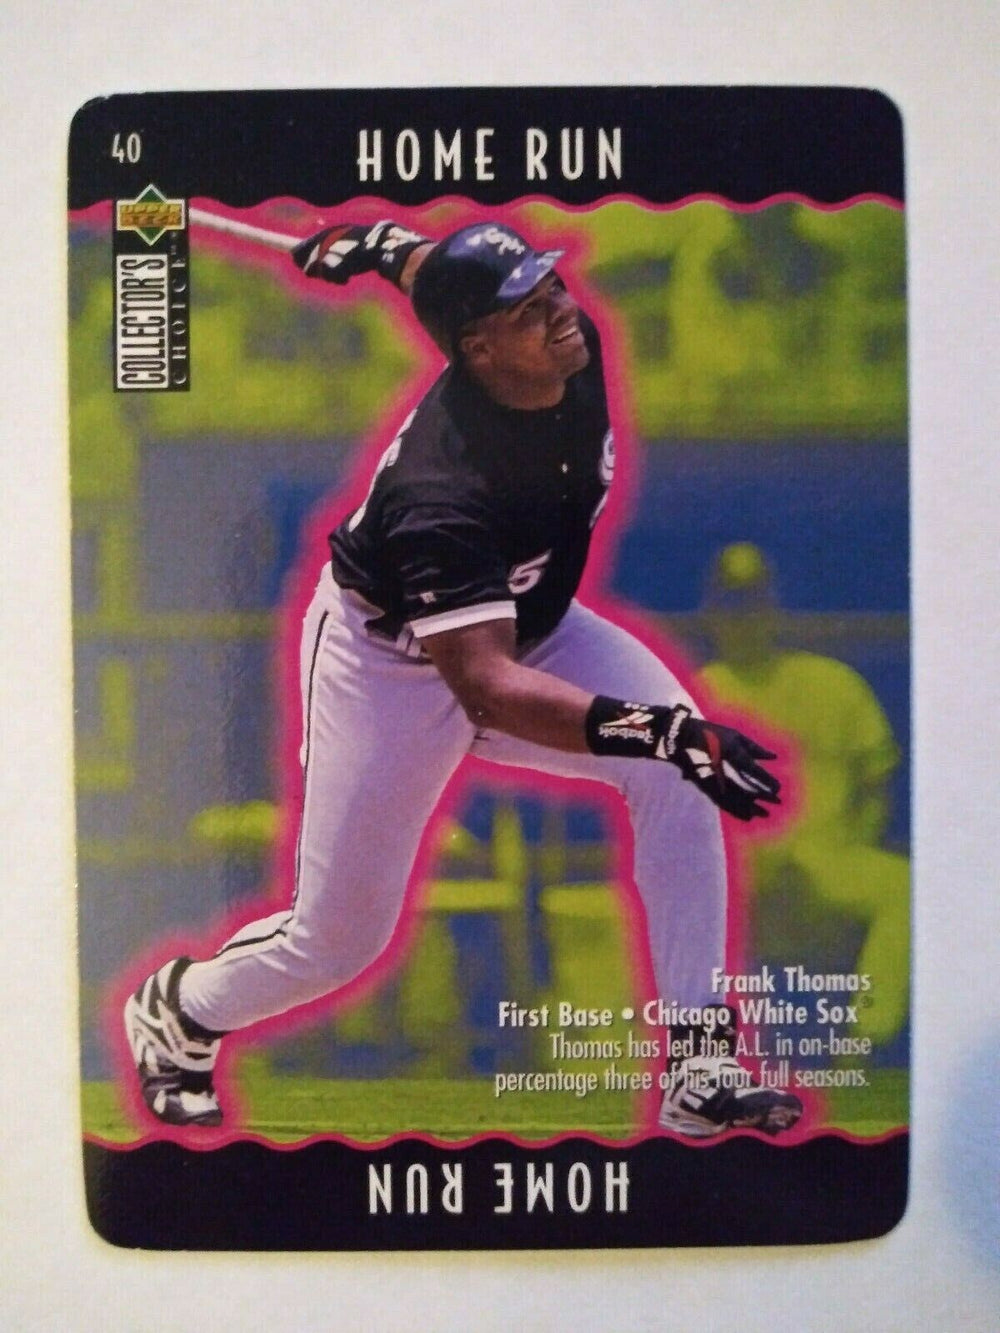 Frank Thomas 1996 Upper Deck Collector's Choice You Make the Play Series Mint Card #40